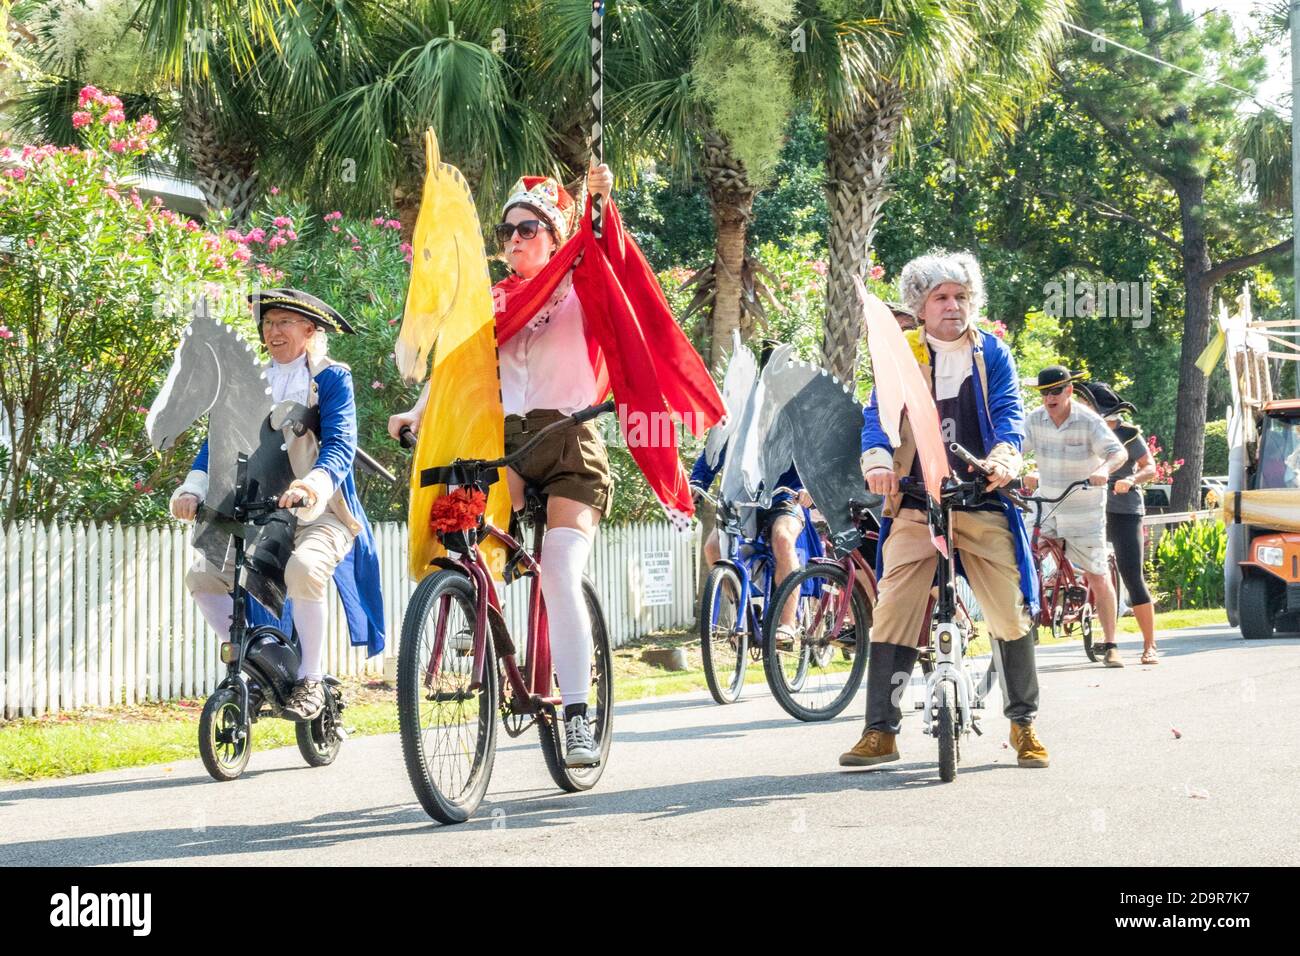 Dressed in costumes bicyclists ride down the road during the annual Independence Day parade July 4, 2019 in Sullivan's Island, South Carolina. The tiny affluent Sea Island beach community across from Charleston holds an outsized golf cart parade featuring more than 75 decorated carts. Stock Photo